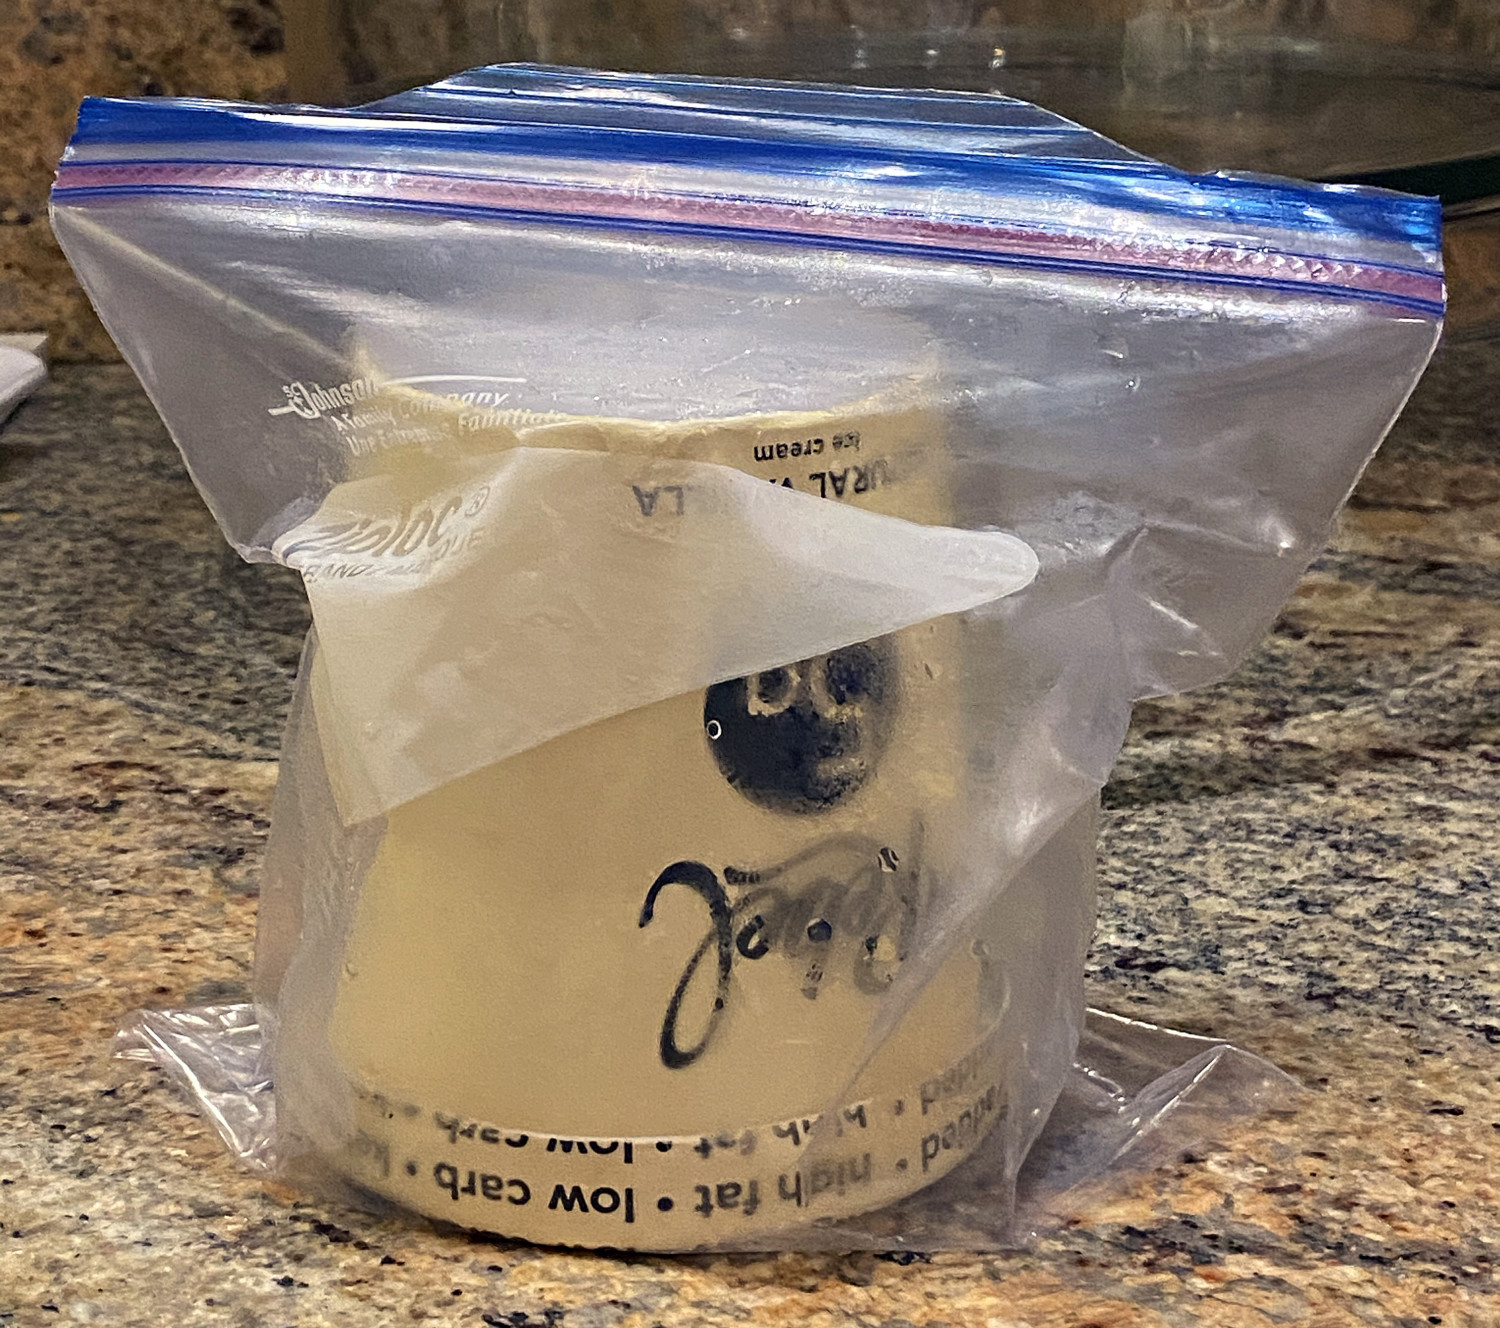 Storing ice cream in a Ziploc supposedly prevents freezer burn so we tested  it out